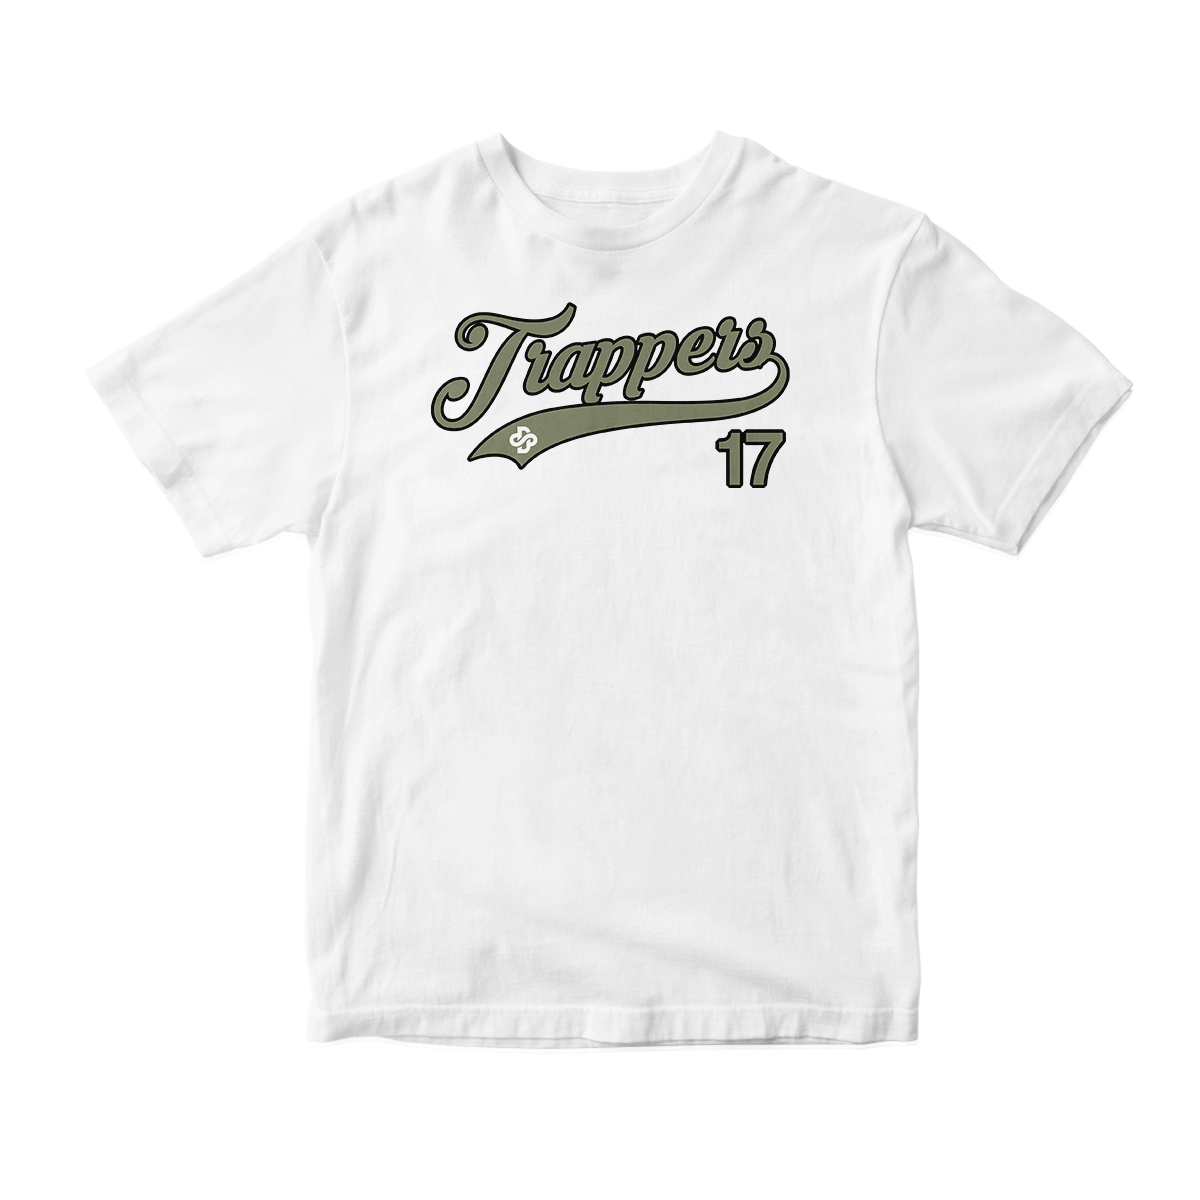 'Trappers' in Medium Olive CW Short Sleeve Tee